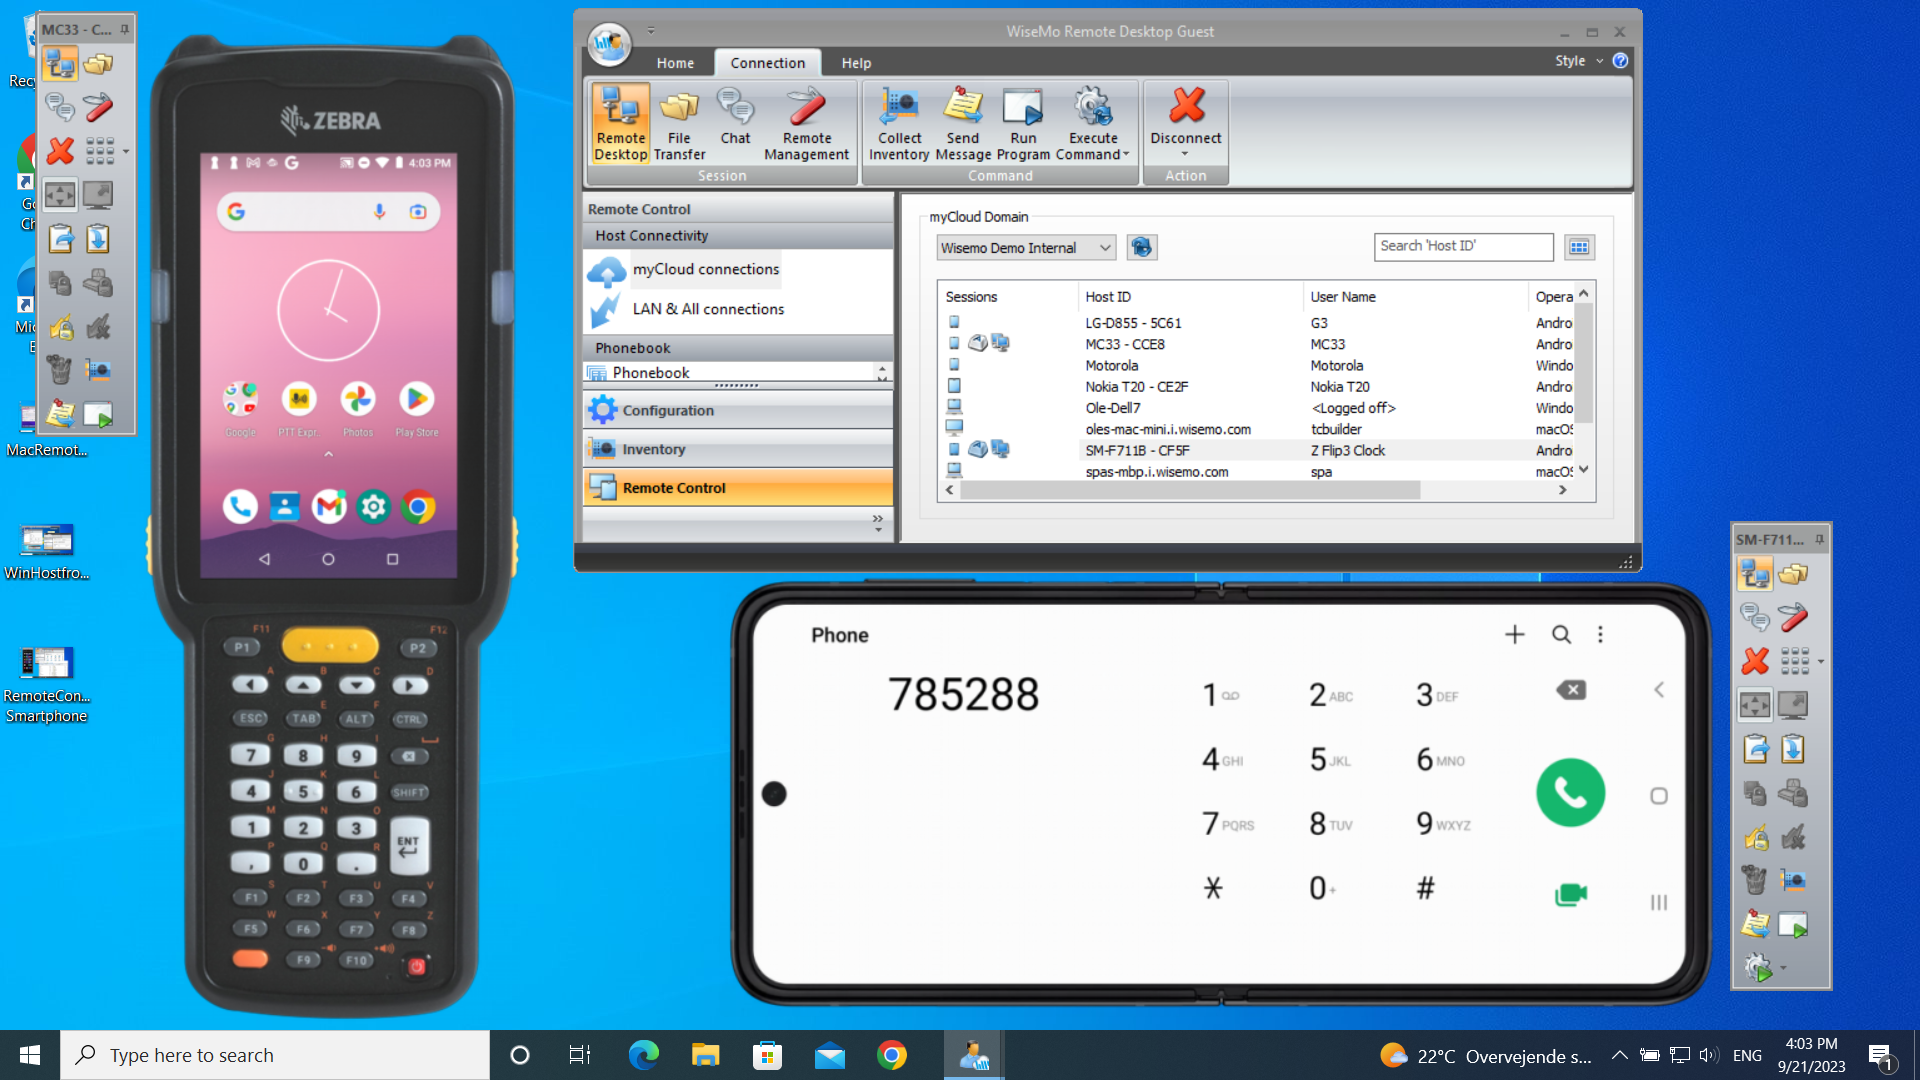 Remote control Zebra device from Windows 10 simultaneously with Samsung device remote controlled